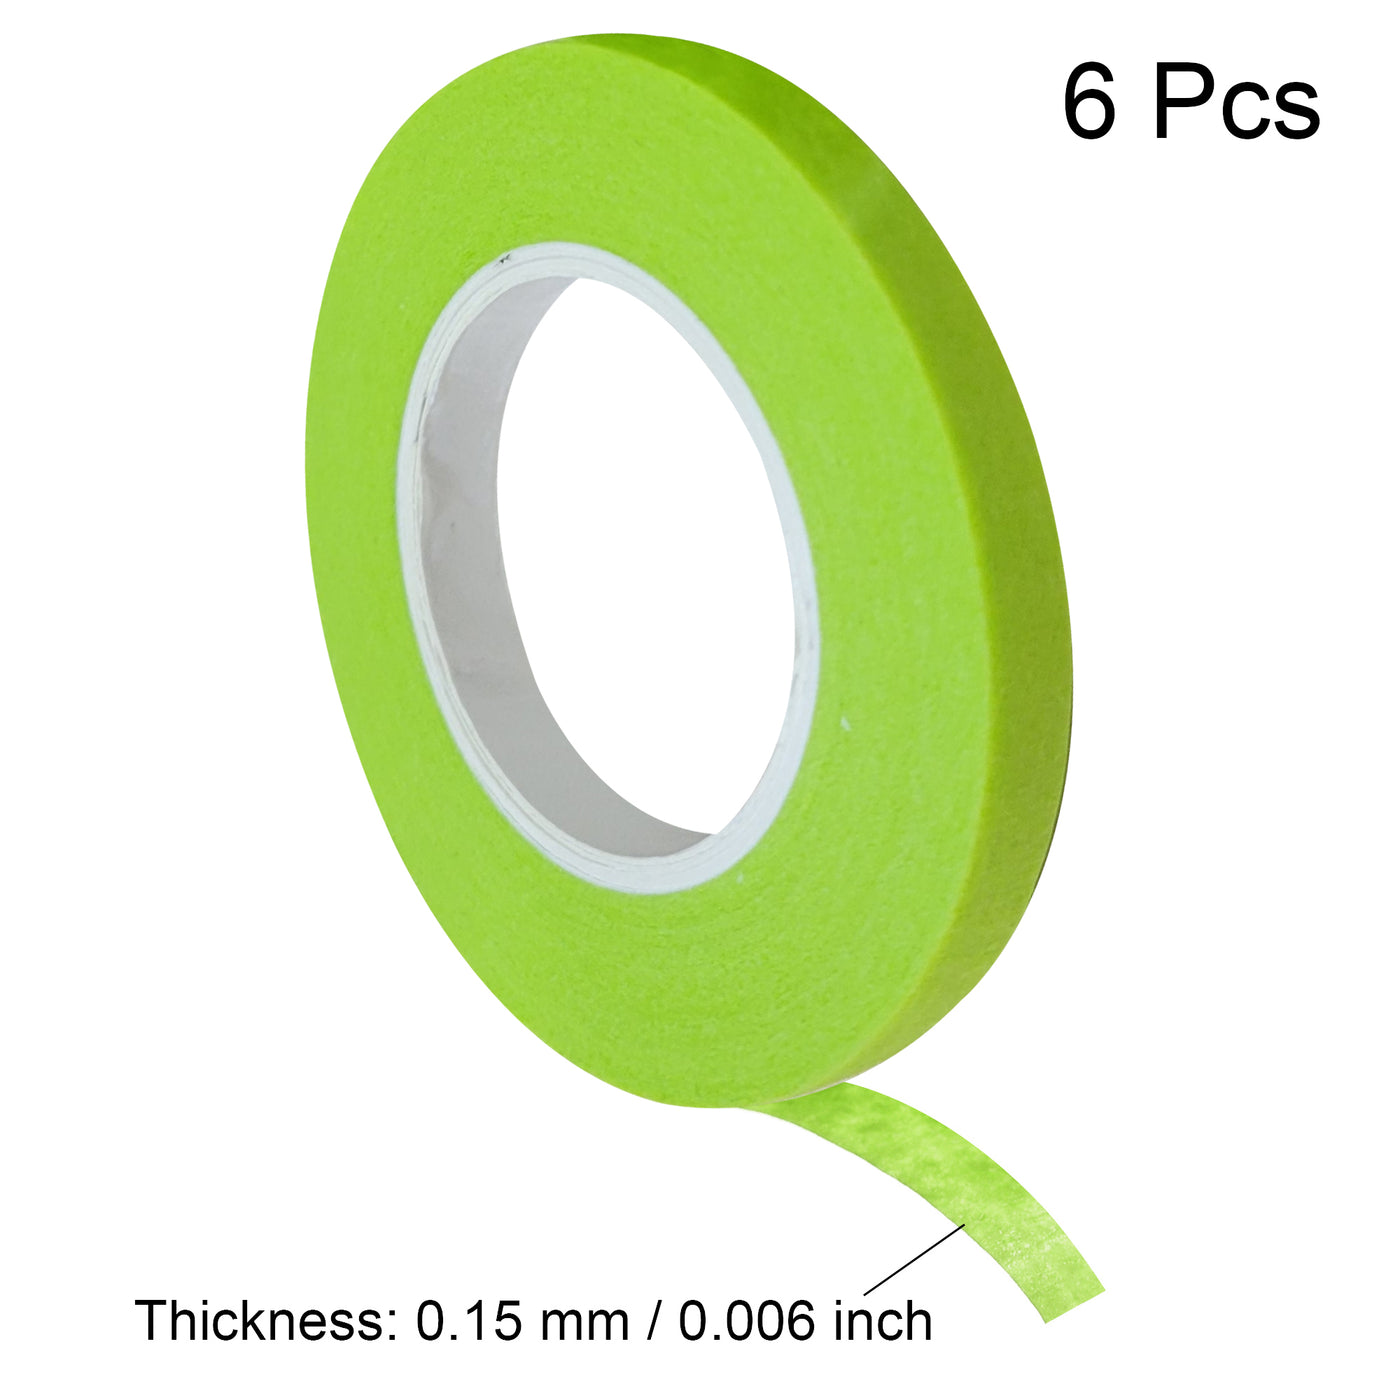 uxcell Uxcell 6Pcs 7mm 0.28 inch Wide 20m 21 Yards Masking Tape Painter Tape Rolls Light Green